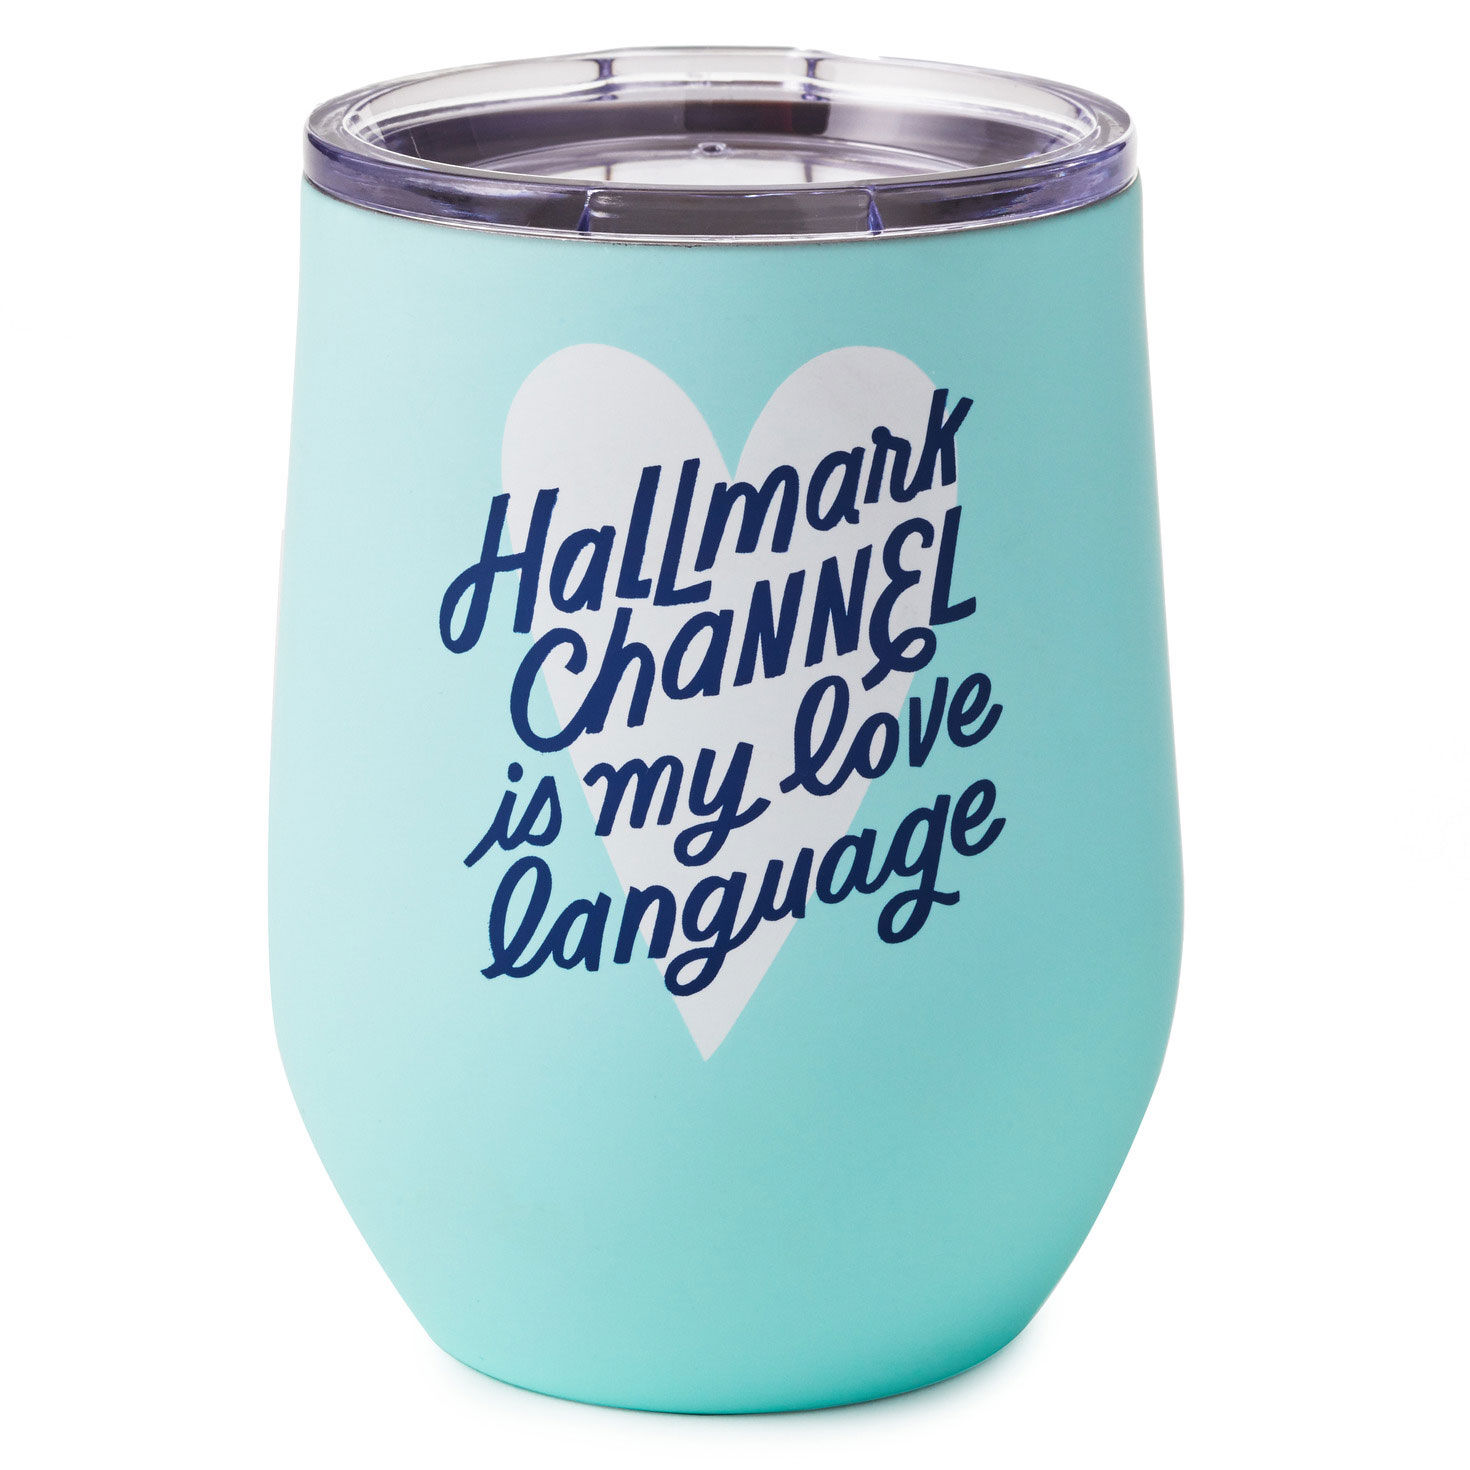 https://www.hallmark.com/dw/image/v2/AALB_PRD/on/demandware.static/-/Sites-hallmark-master/default/dw8ae67cc2/images/finished-goods/products/1HKC2309/Hallmark-Channel-Love-Language-Stainless-Steel-Cup_1HKC2309_01.jpg?sfrm=jpg